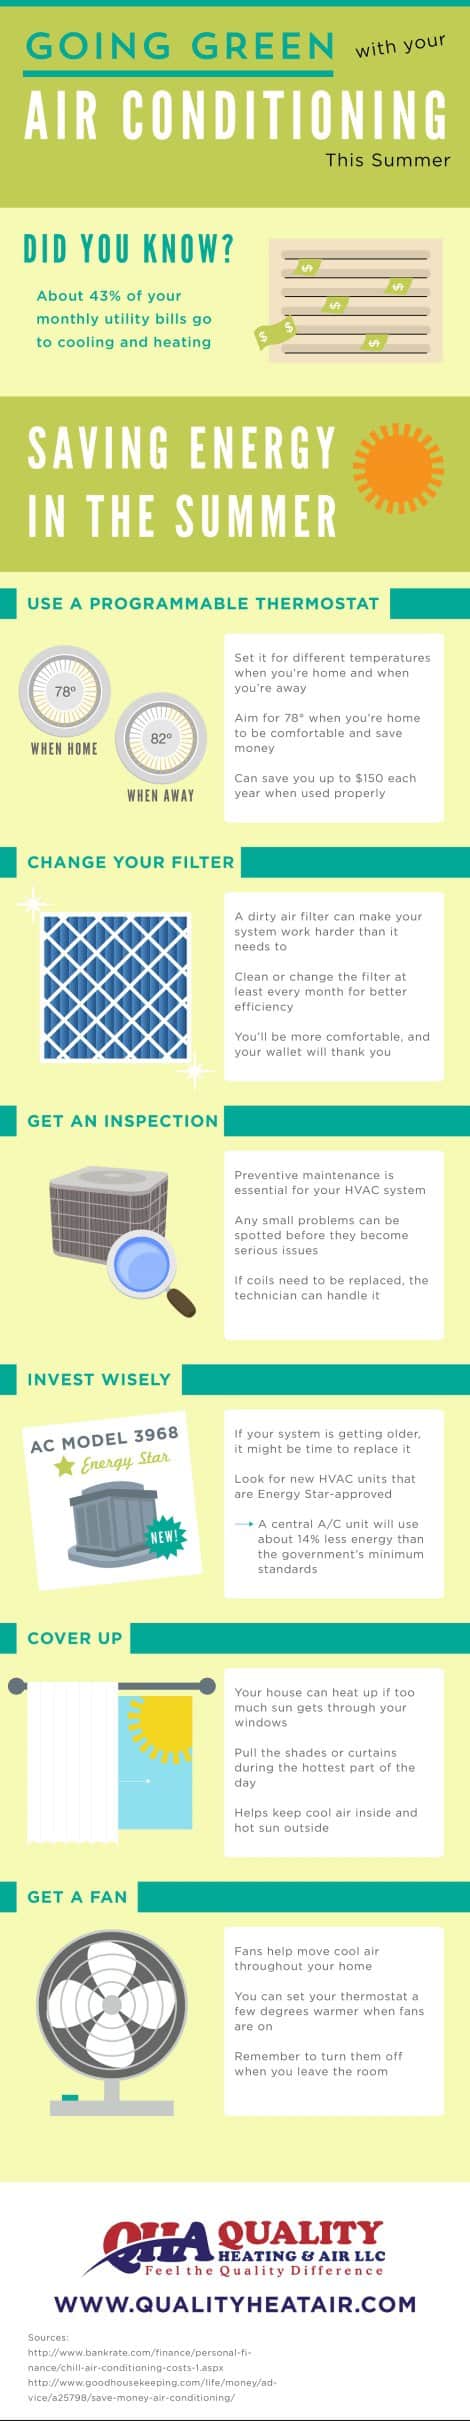 Going Green with Your Air Conditioning